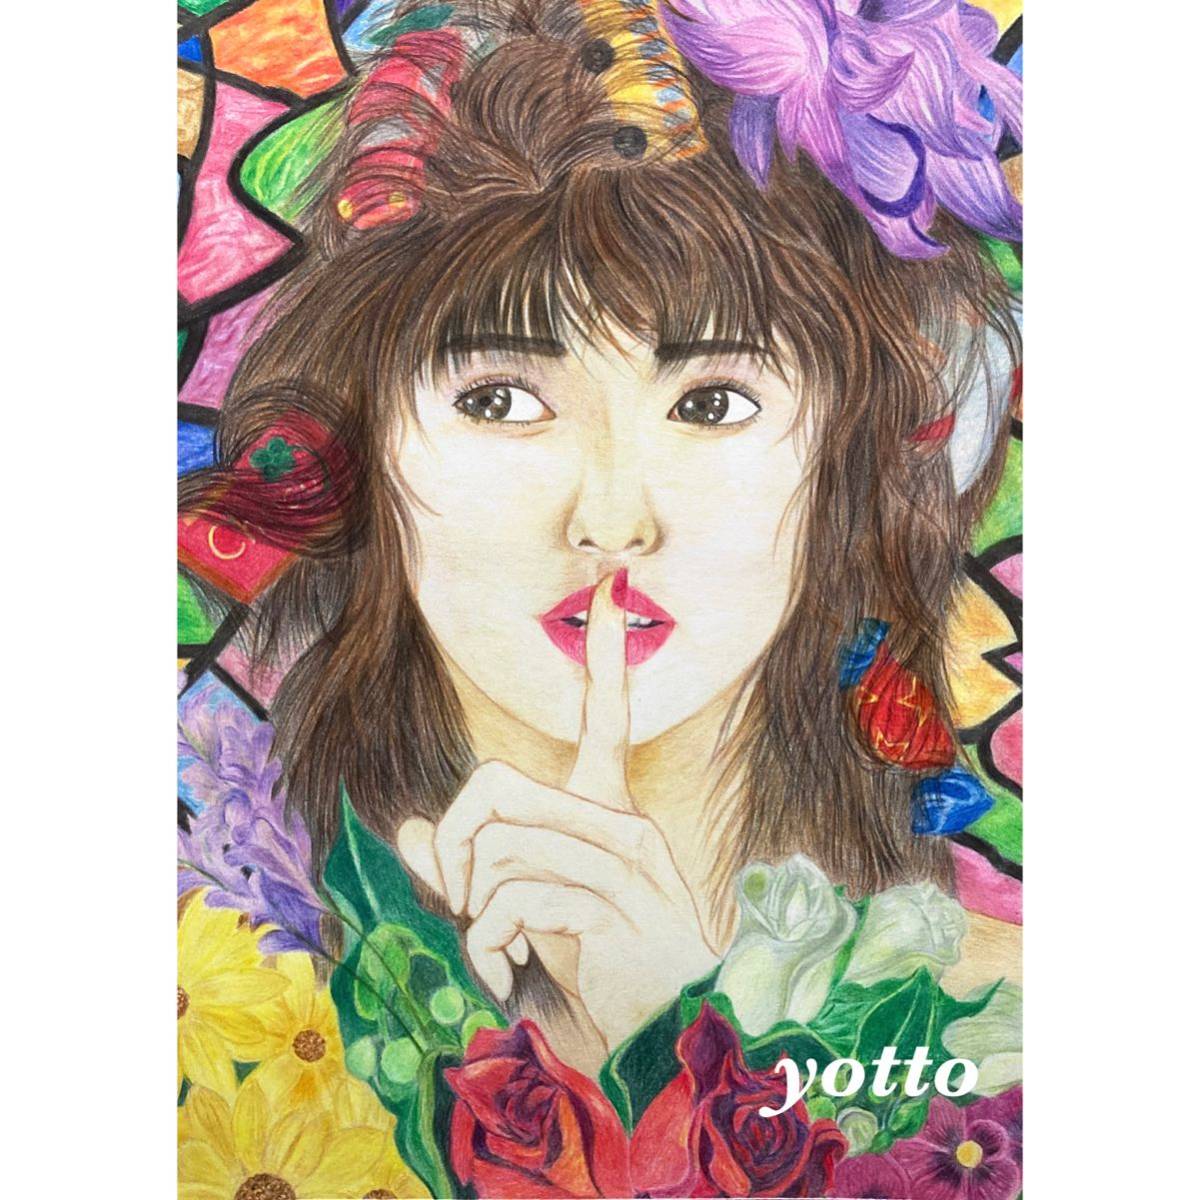 Colored pencil drawing The truth is... A4 size with frame◇◆Hand-drawn◇Original drawing◆Yotto◇, artwork, painting, pencil drawing, charcoal drawing